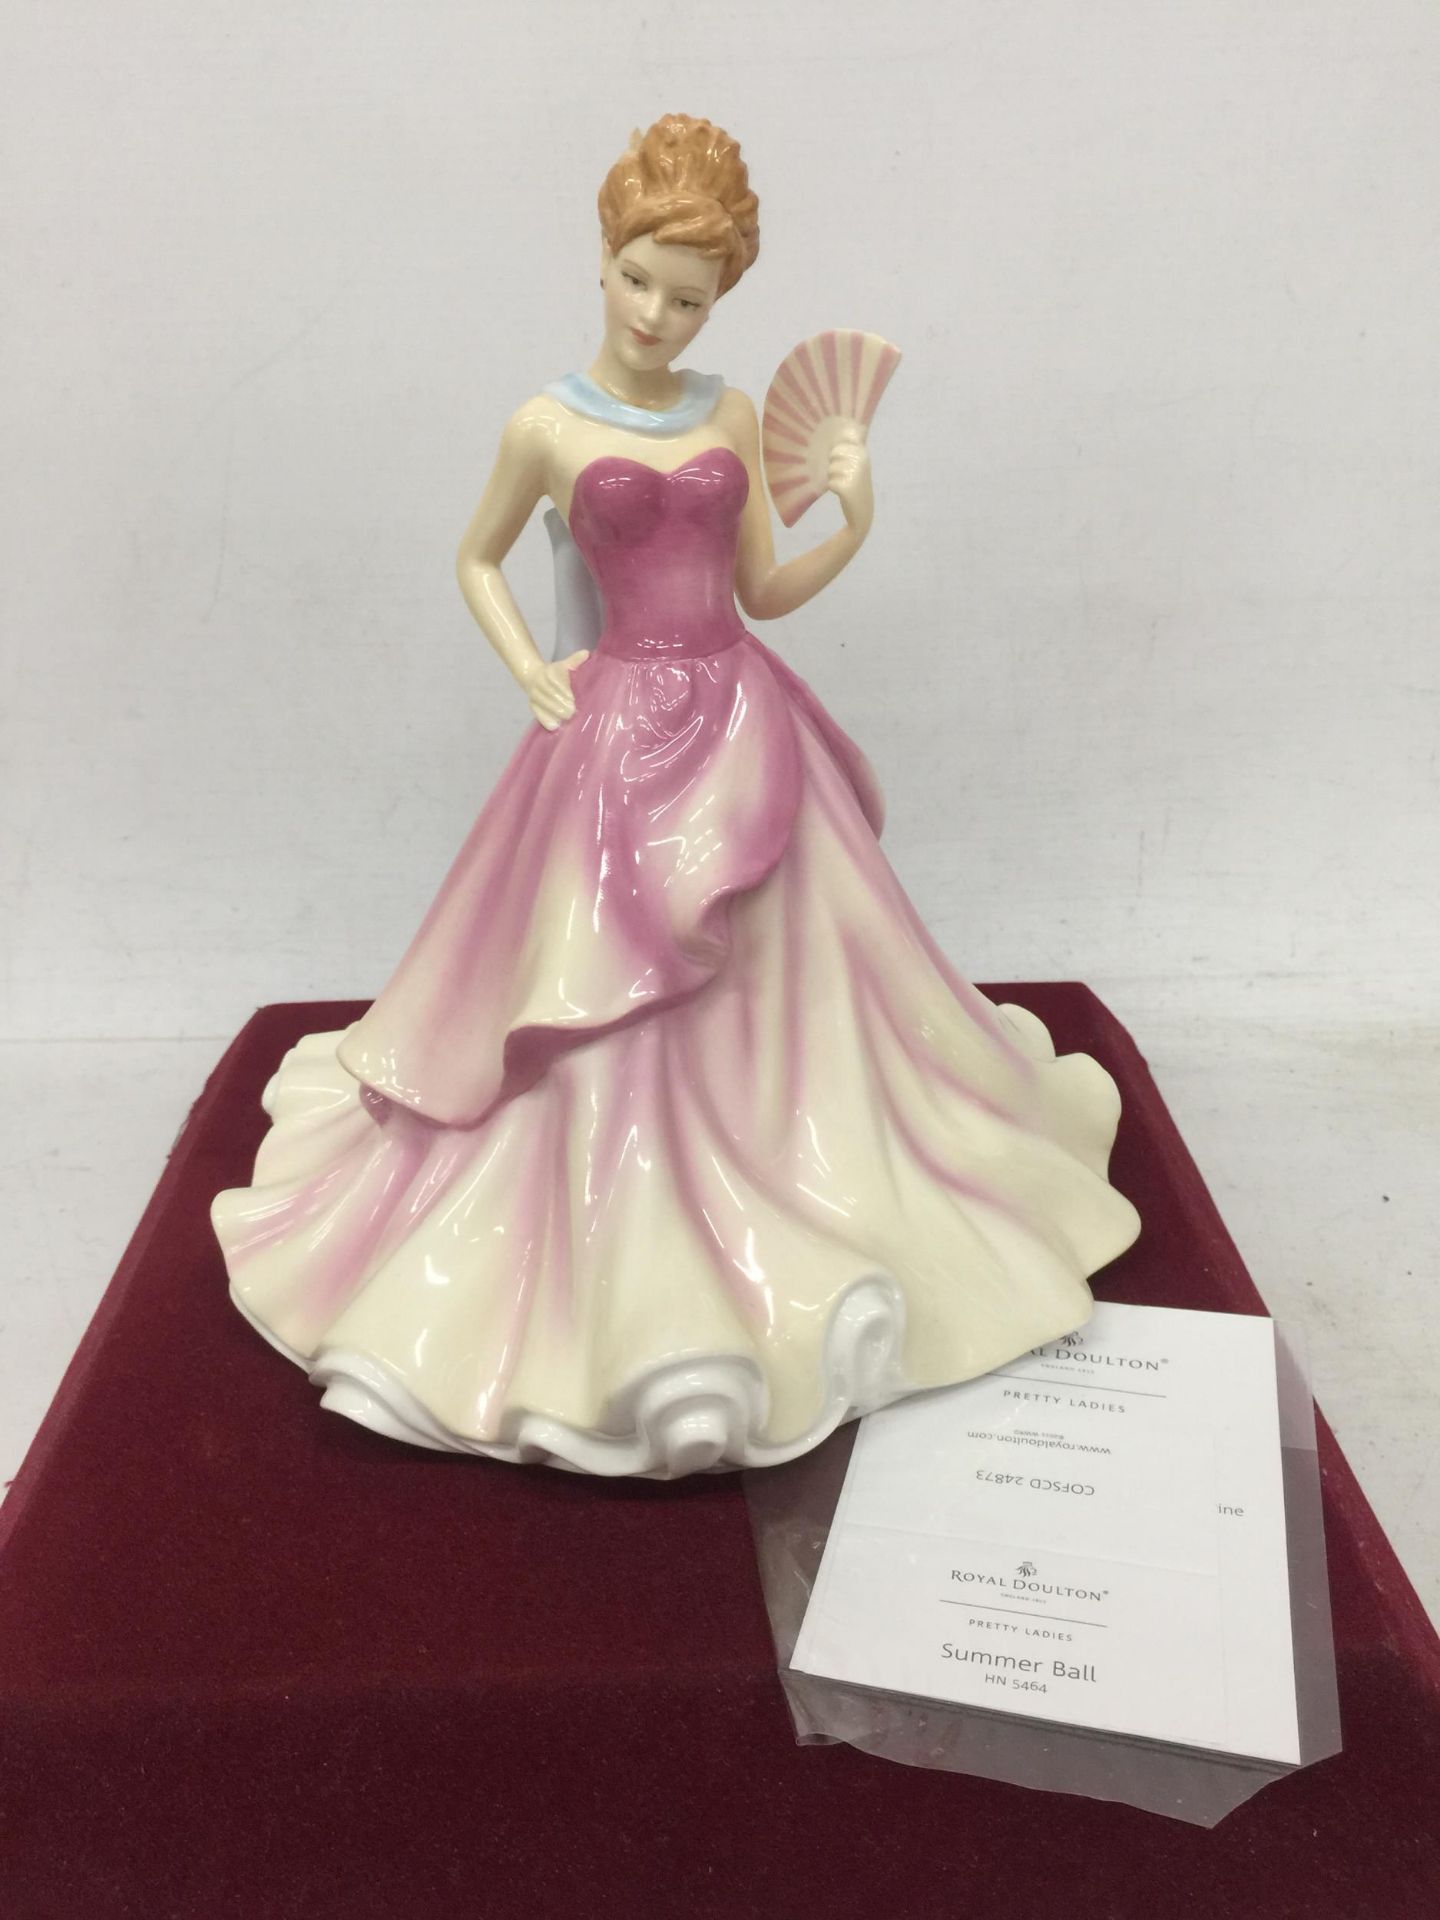 A ROYAL DOULTON PRETTY LADIES SUMMER BALL, HN5464 BONE CHINA LADY FIGURE WITH CERTIFICATE